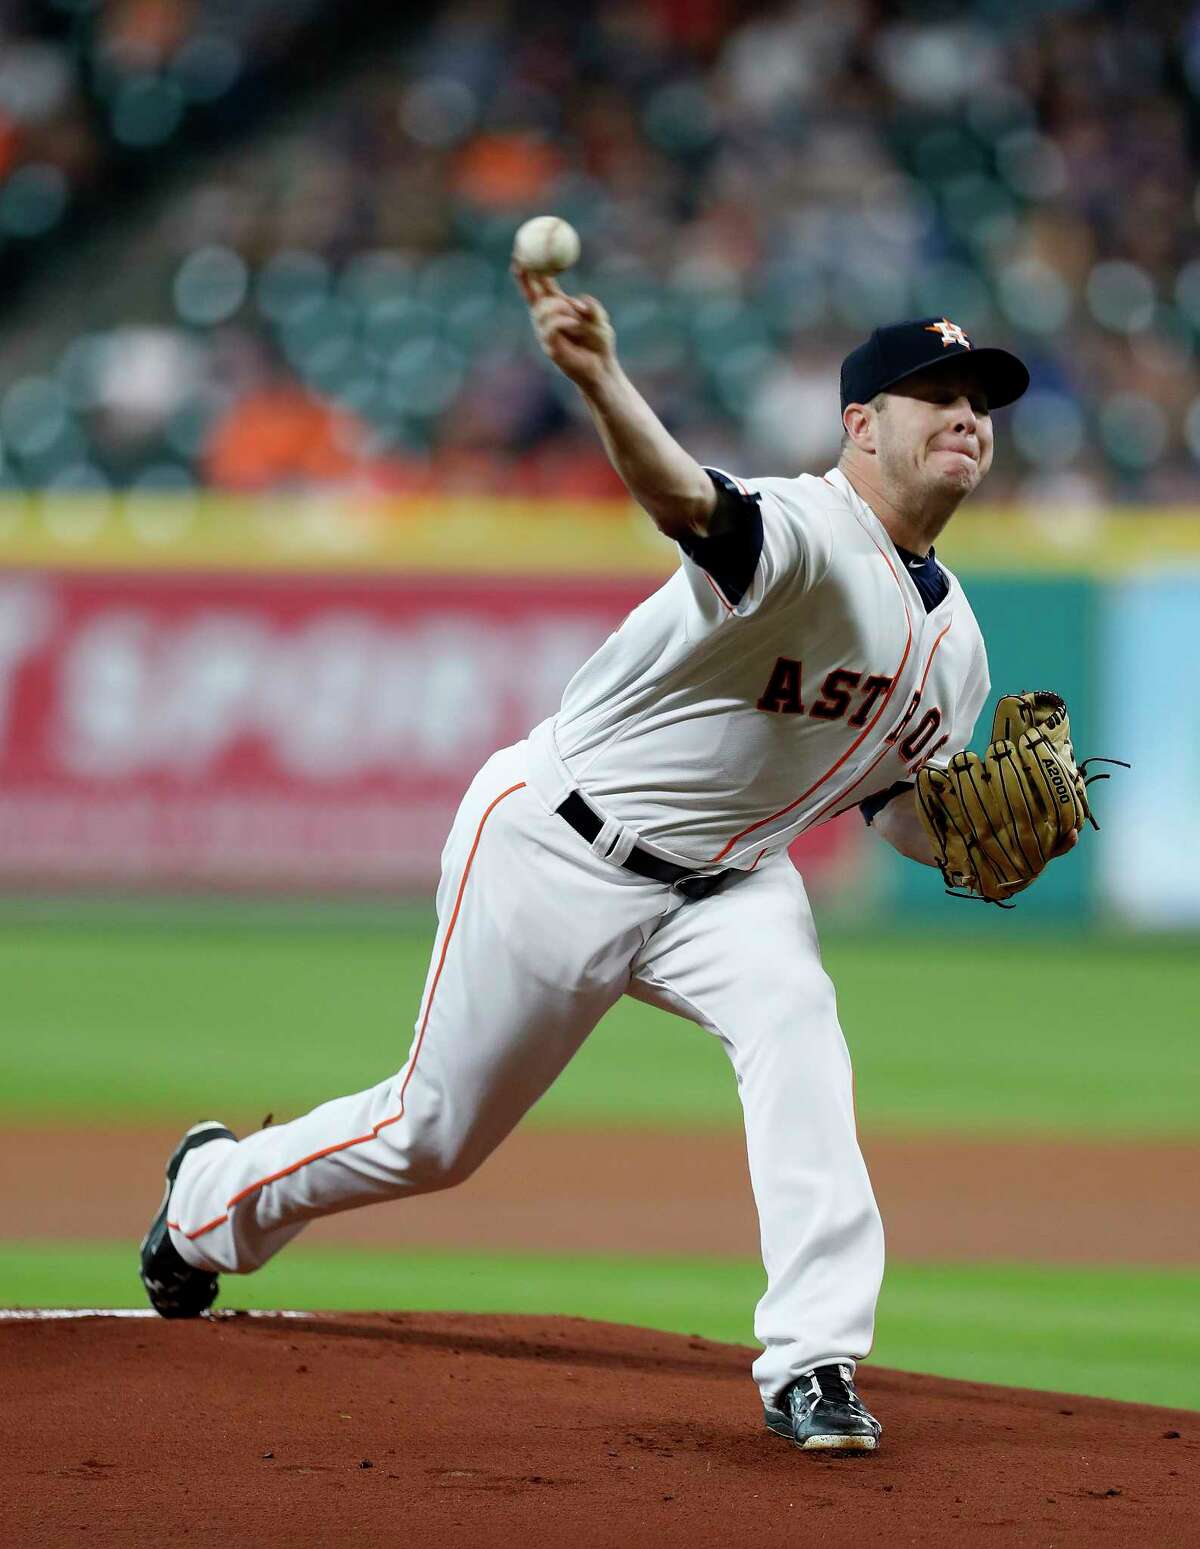 Houston Astros relief pitcher Brad Peacock (41) pitches during the first inning of an MLB baseball game at Minute Maid Park, Monday, May 22, 2017. ( Karen Warren / Houston Chronicle )